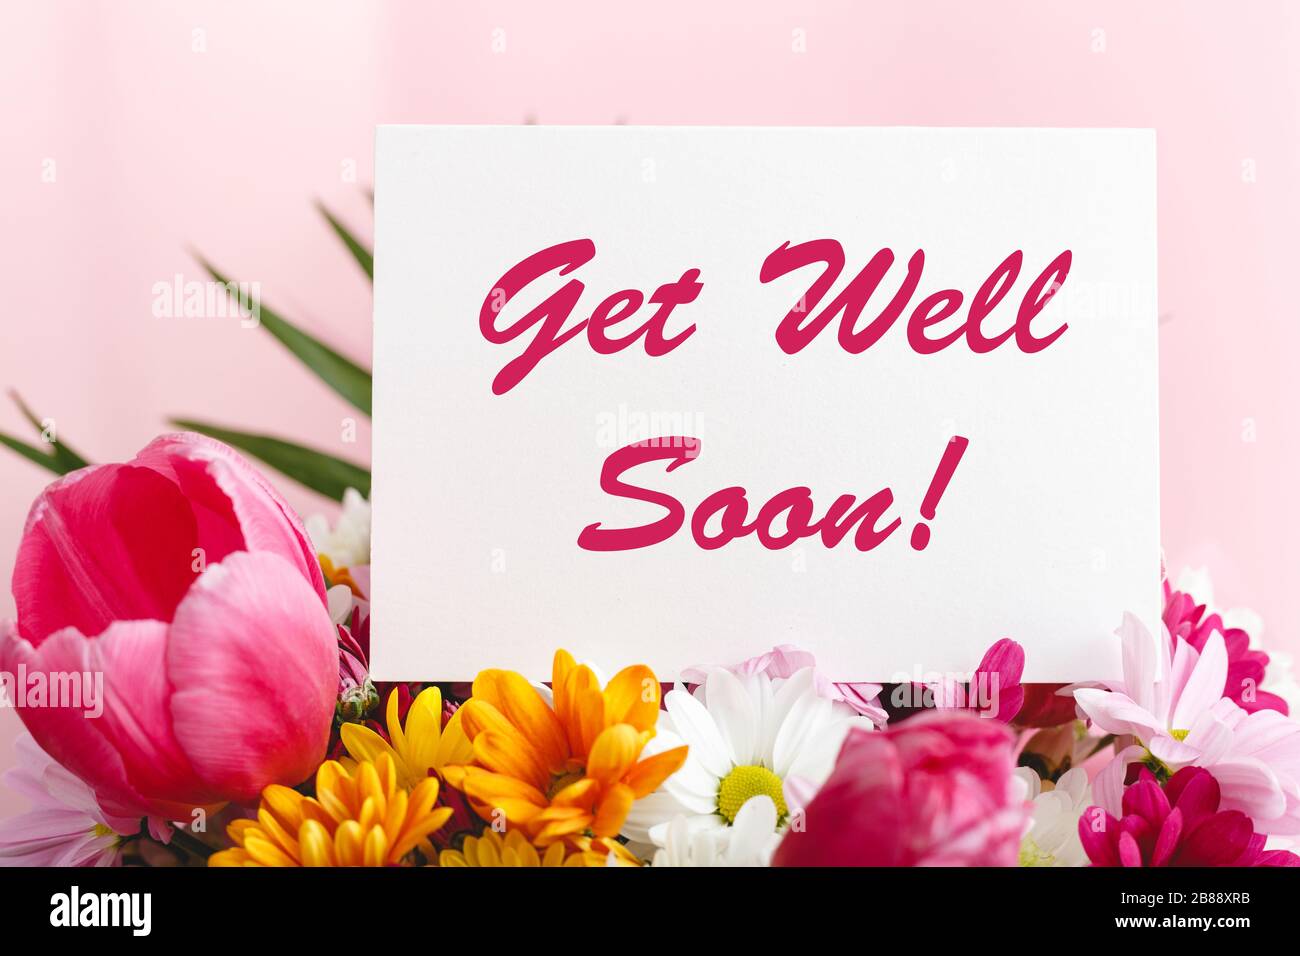 Get Well Soon card in flower bouquet on pink background. Stock photo mock up for text. Stock Photo